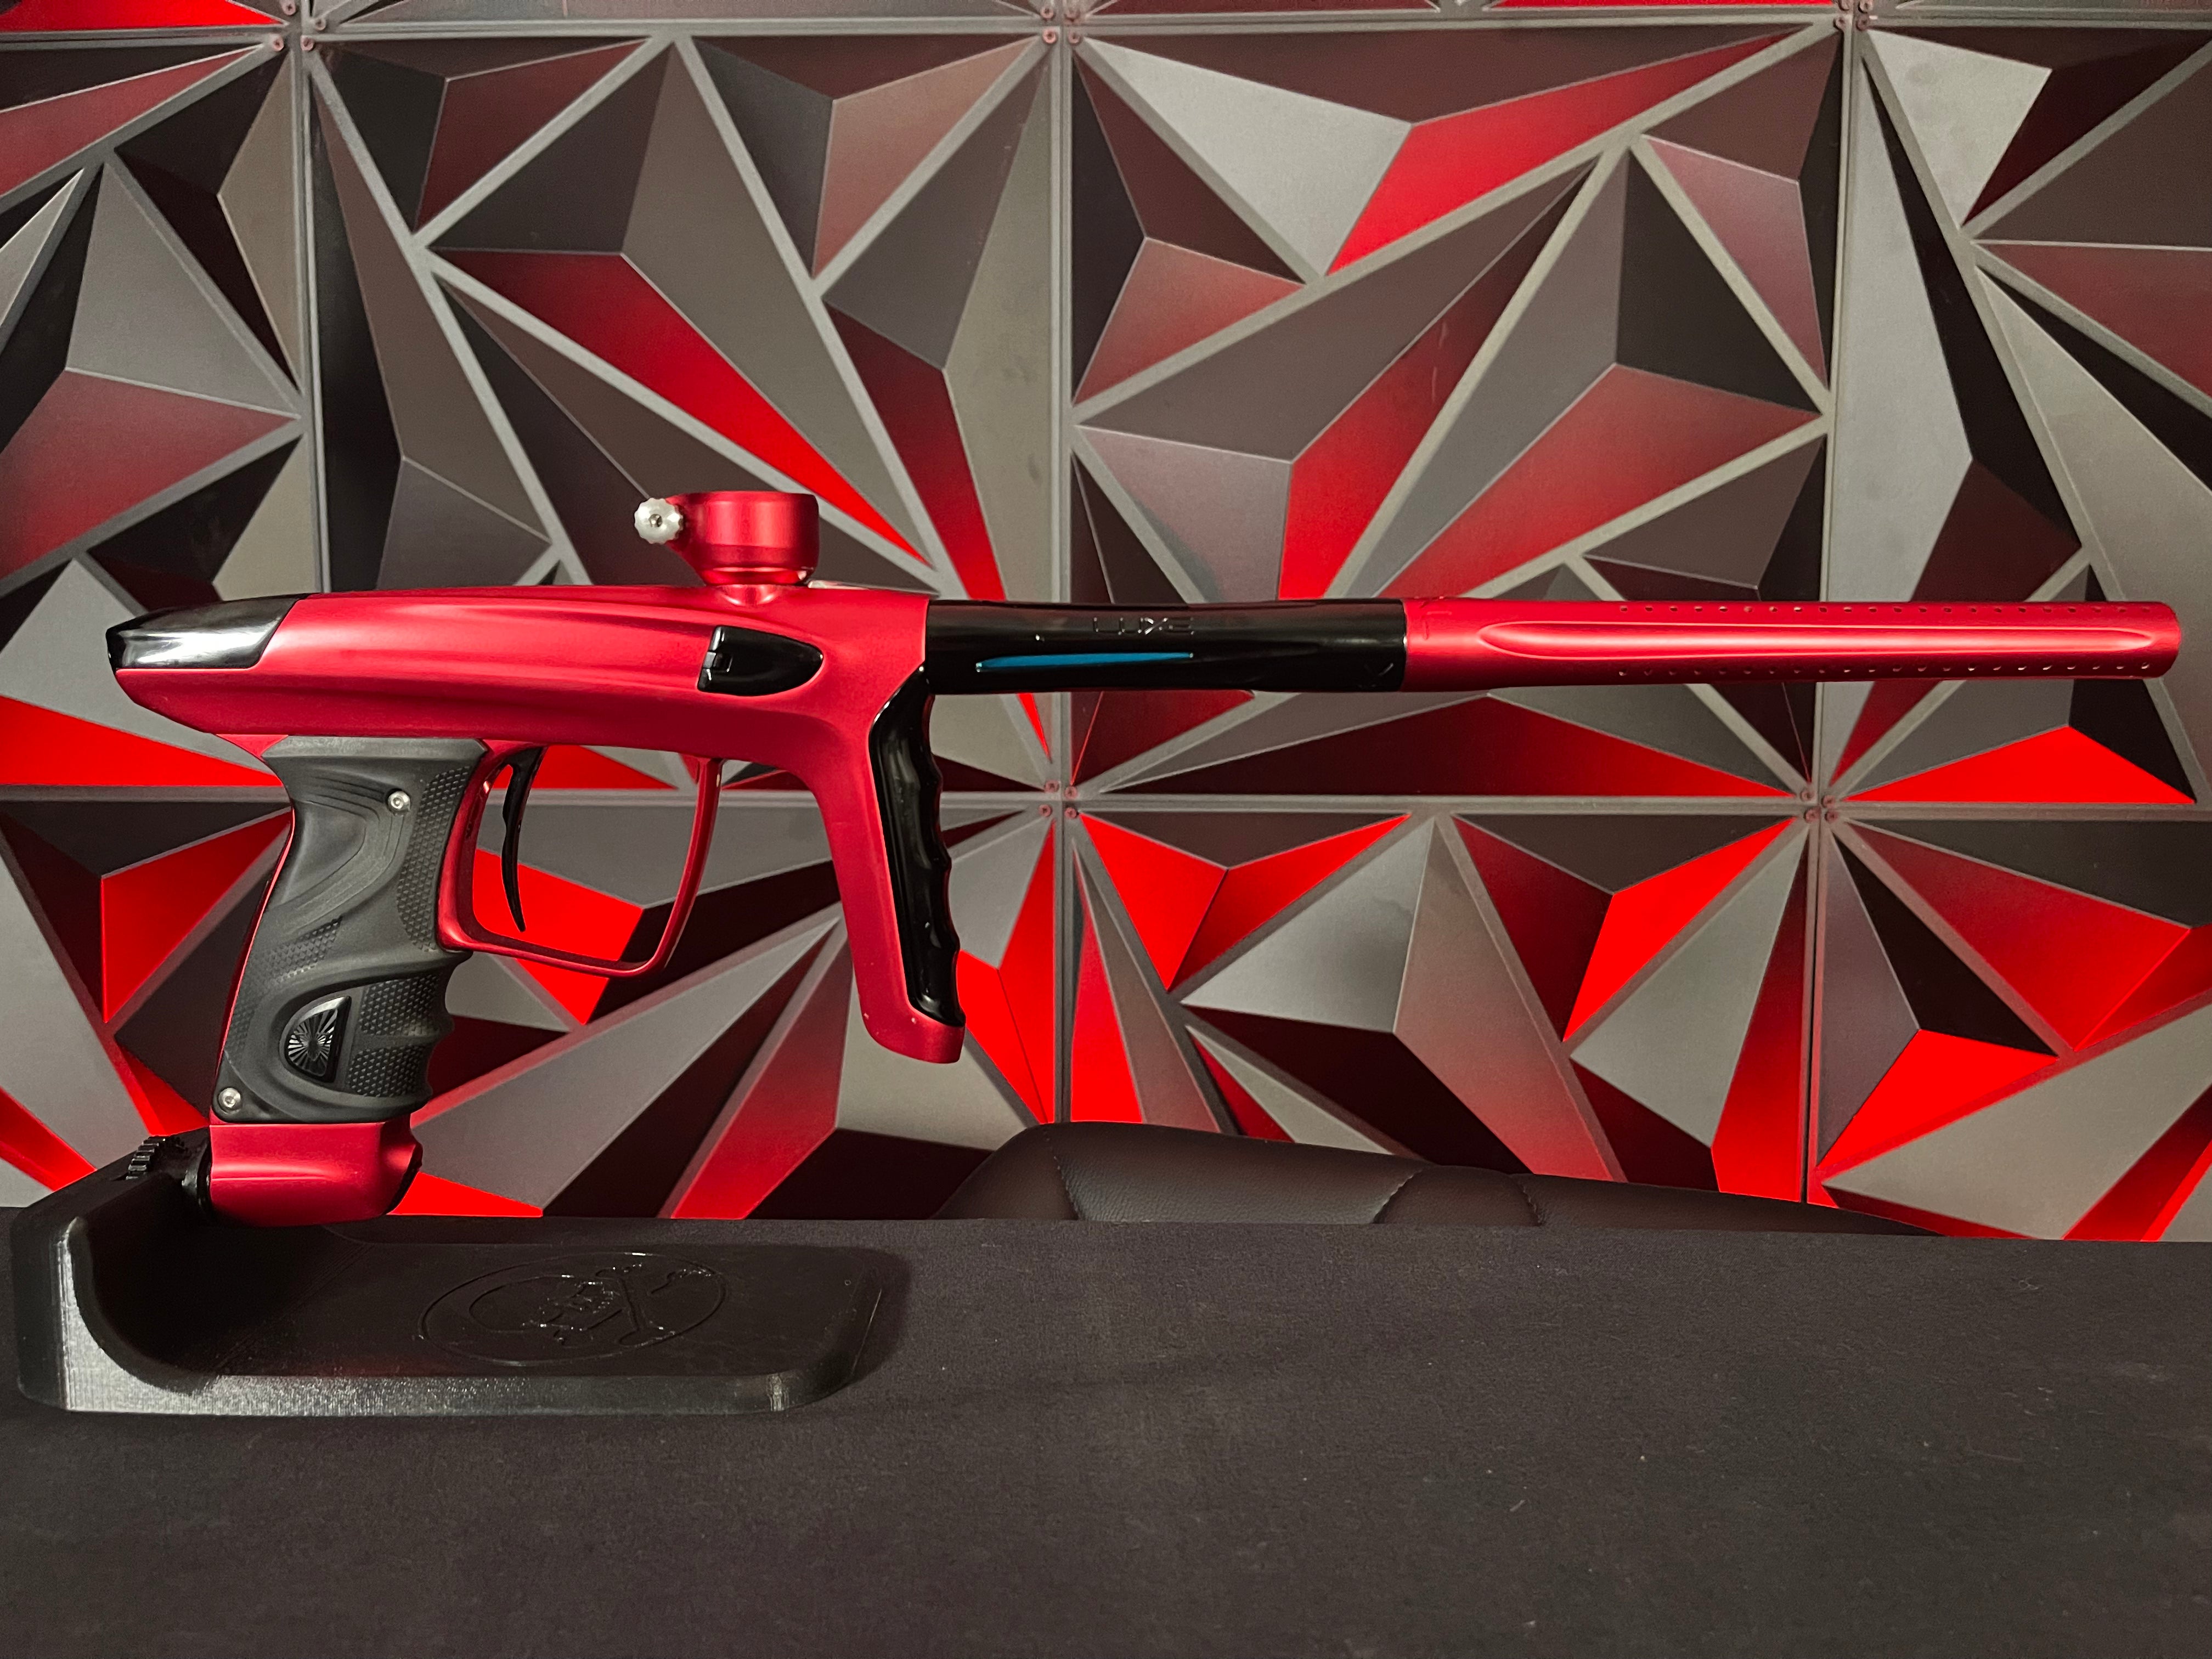 Used DLX Luxe TM40 Paintball Gun- Dust Red/Polished Black